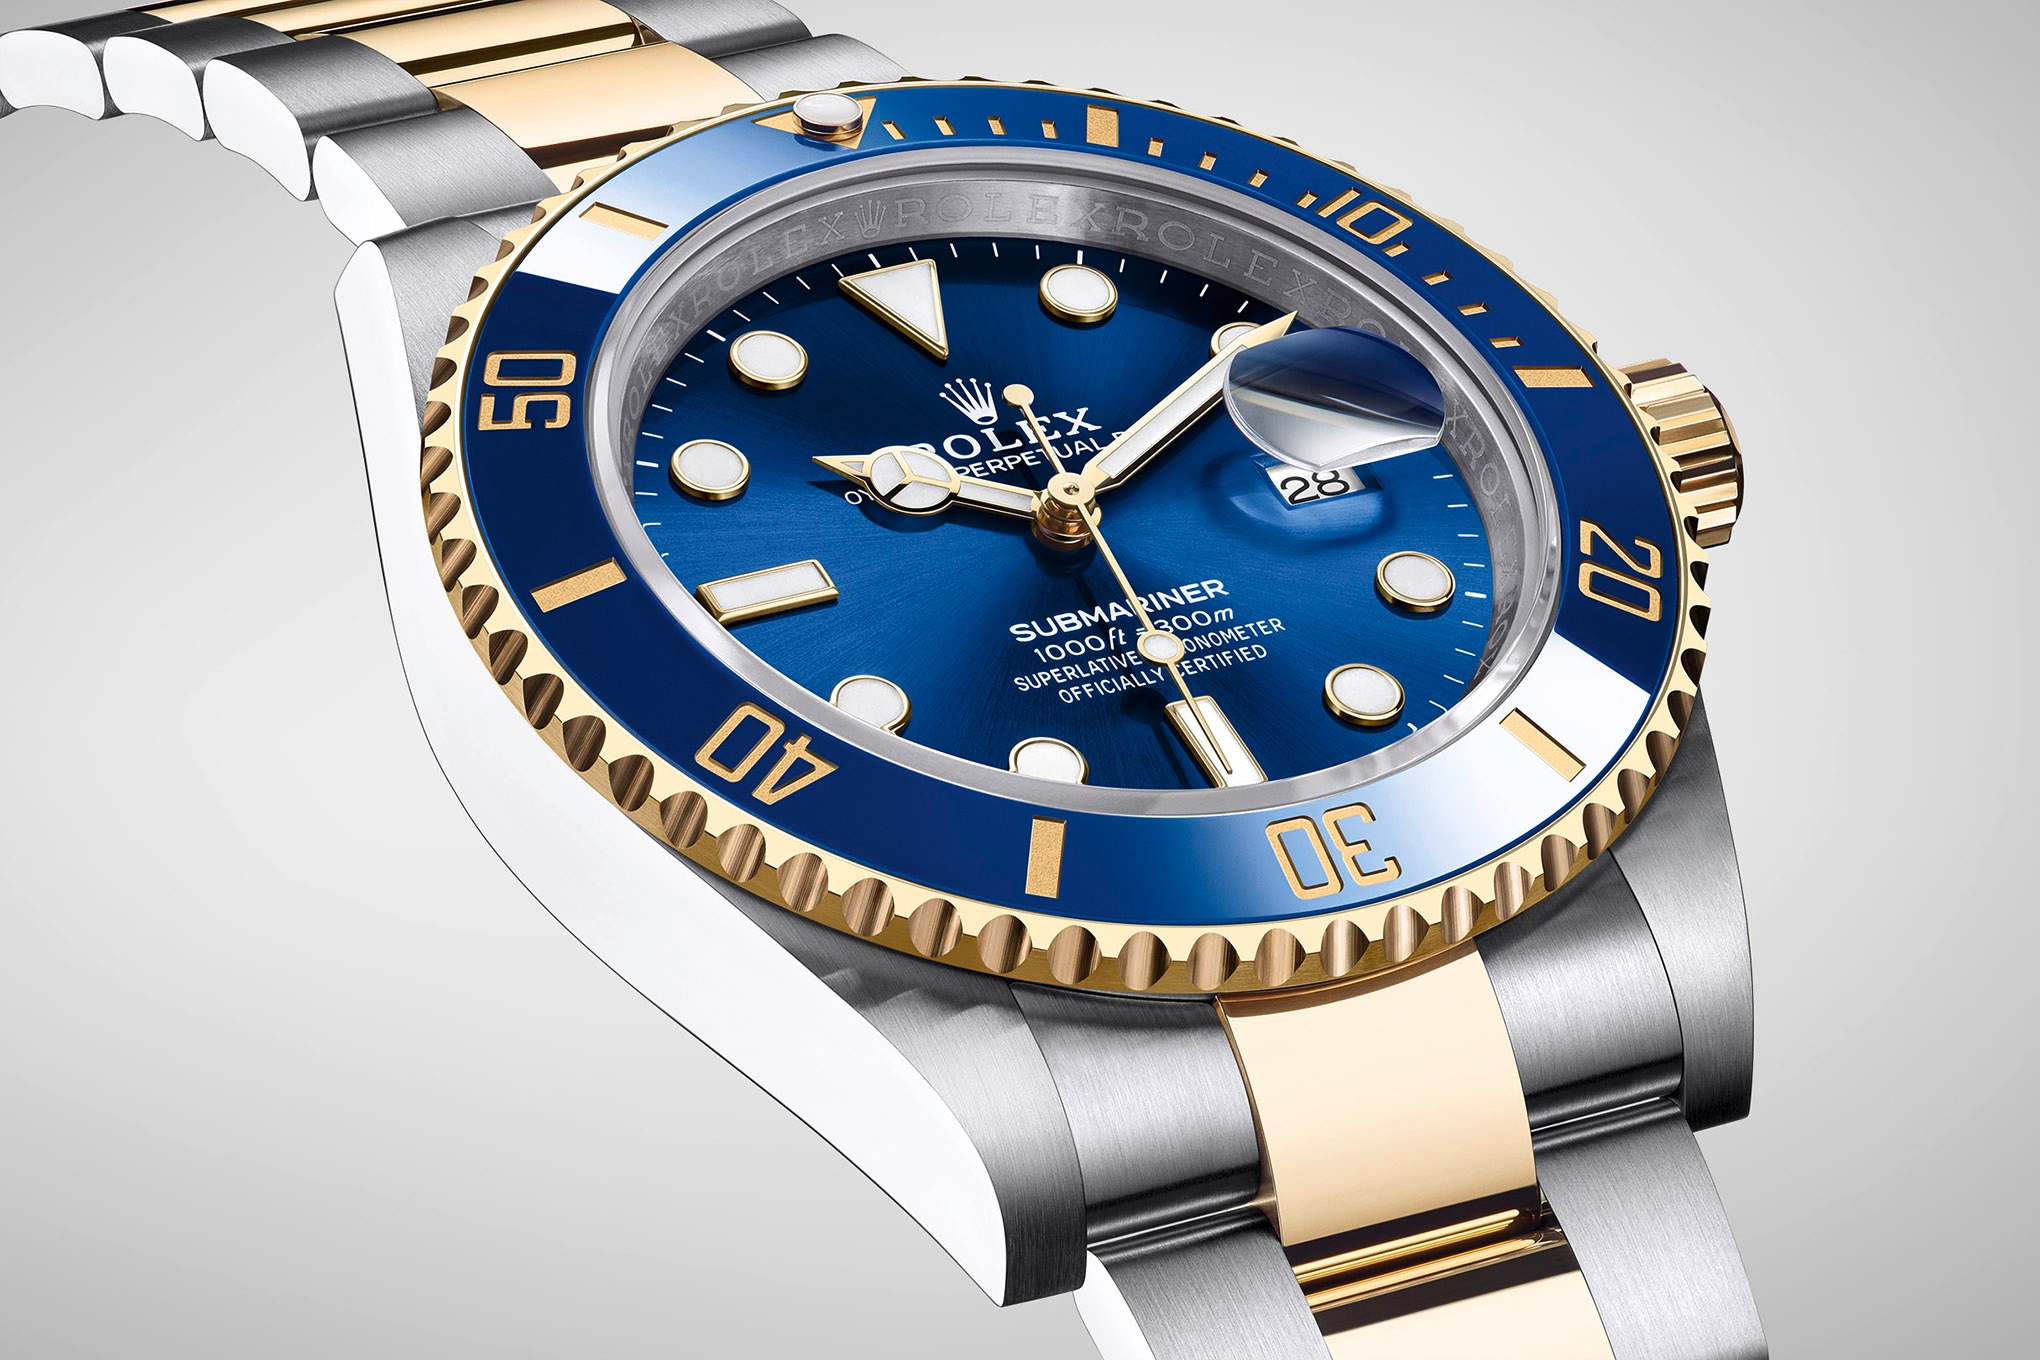 Rolex Oyster Perpetual Submariner Ref: 5508 - Gilt Writing